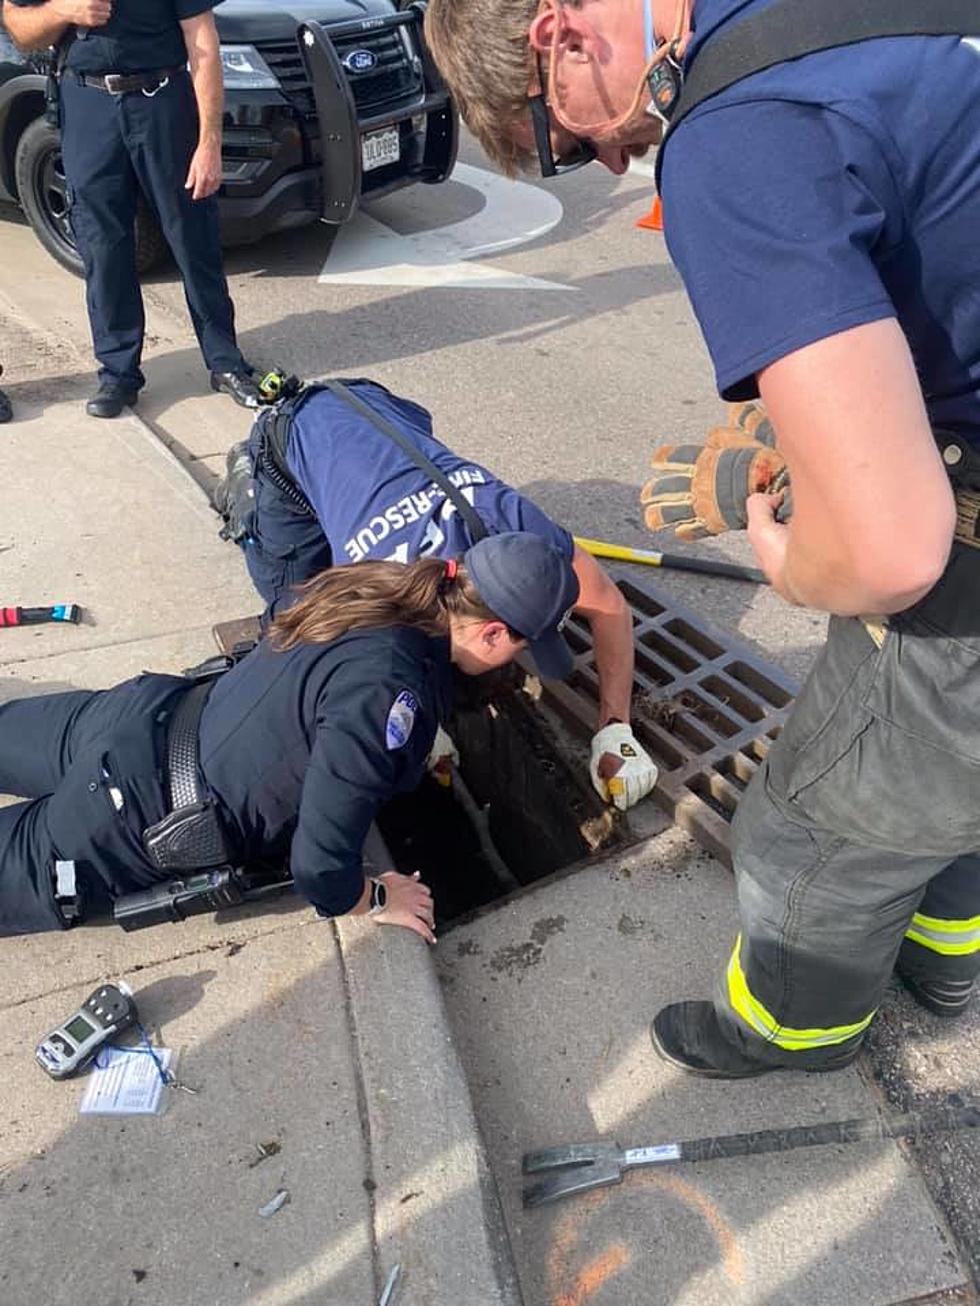 Fort Collins Police, Firefighters Rescue Baby Ducks From Drain